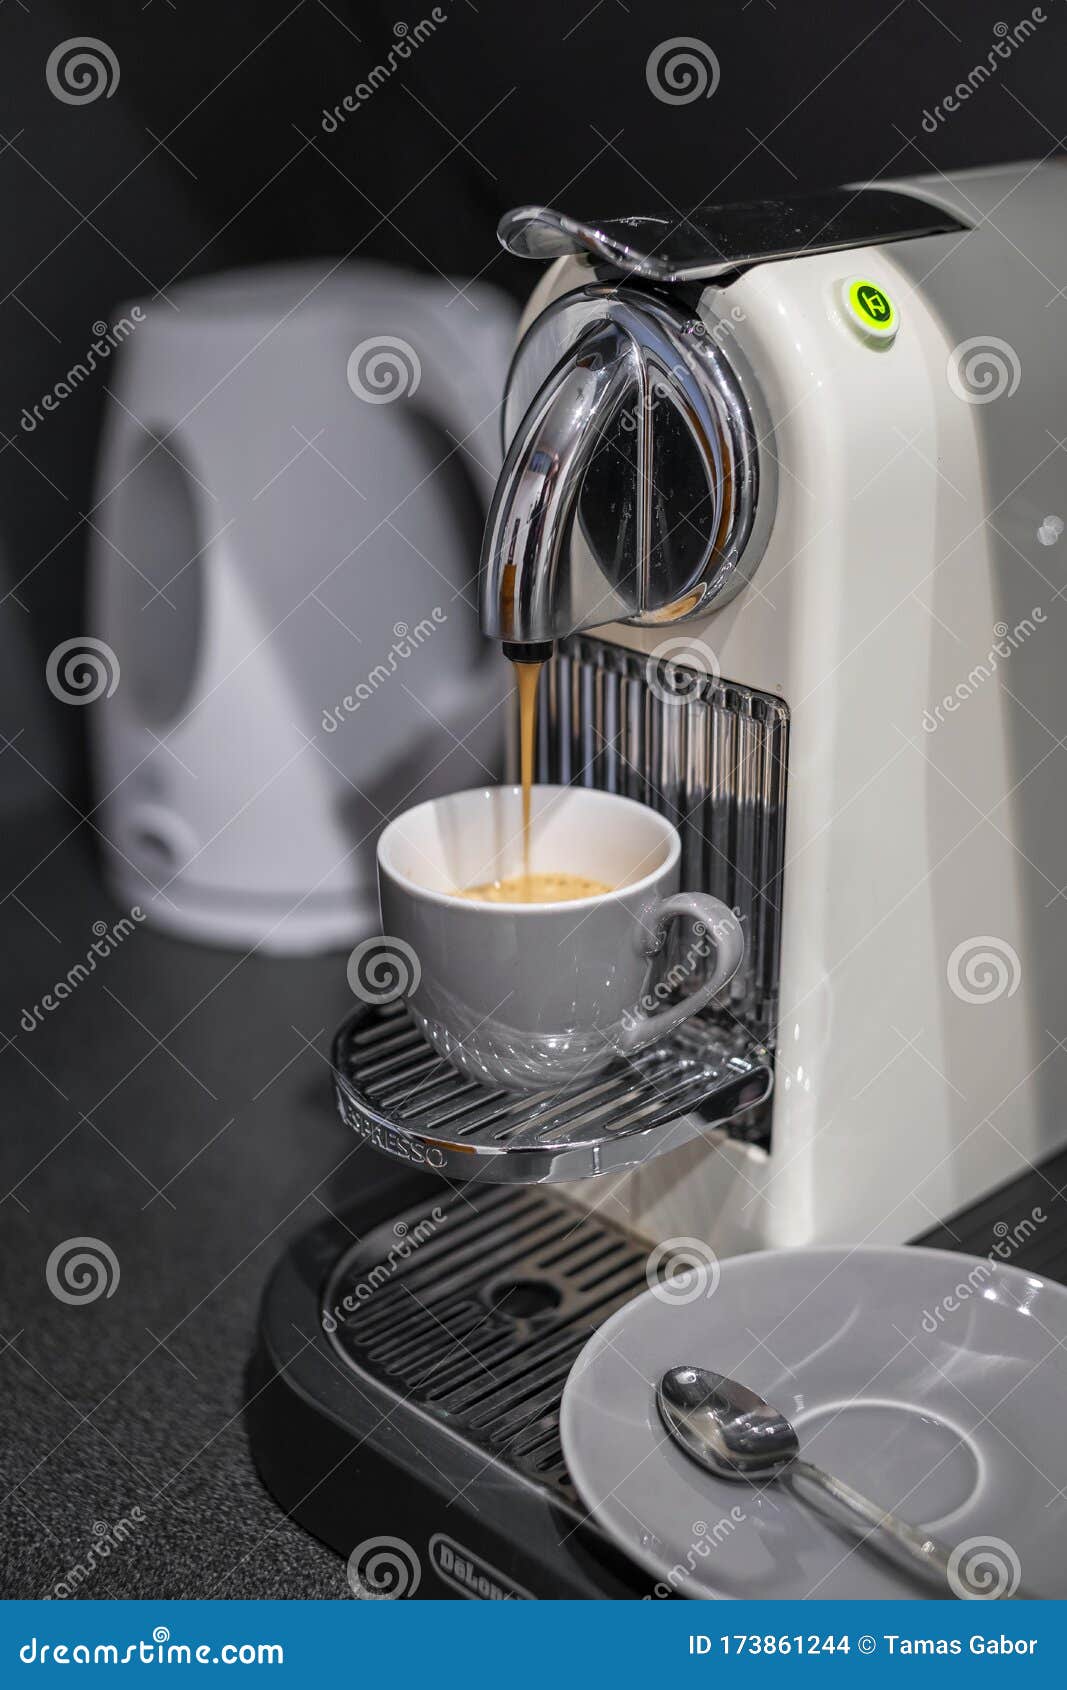 Budapest, Hungary - November 23, 2019: Coffee Making Process with Household DeLonghi Nespresso Machine Editorial Stock Image - Image of depth, breakfast: